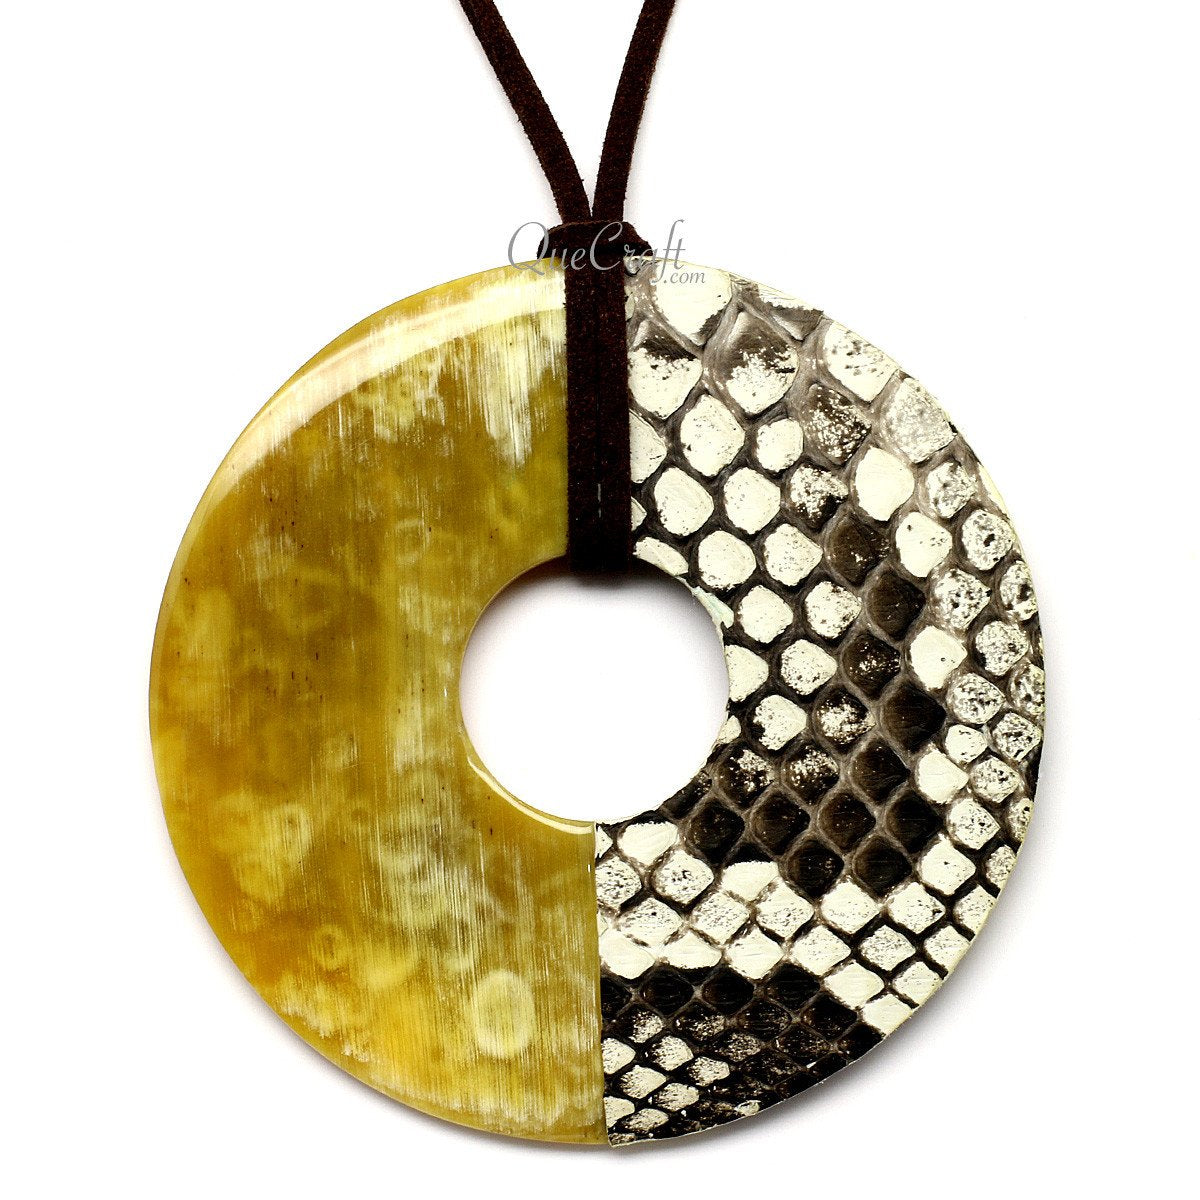 Horn & Leather Pendant #12484 - HORN JEWELRY